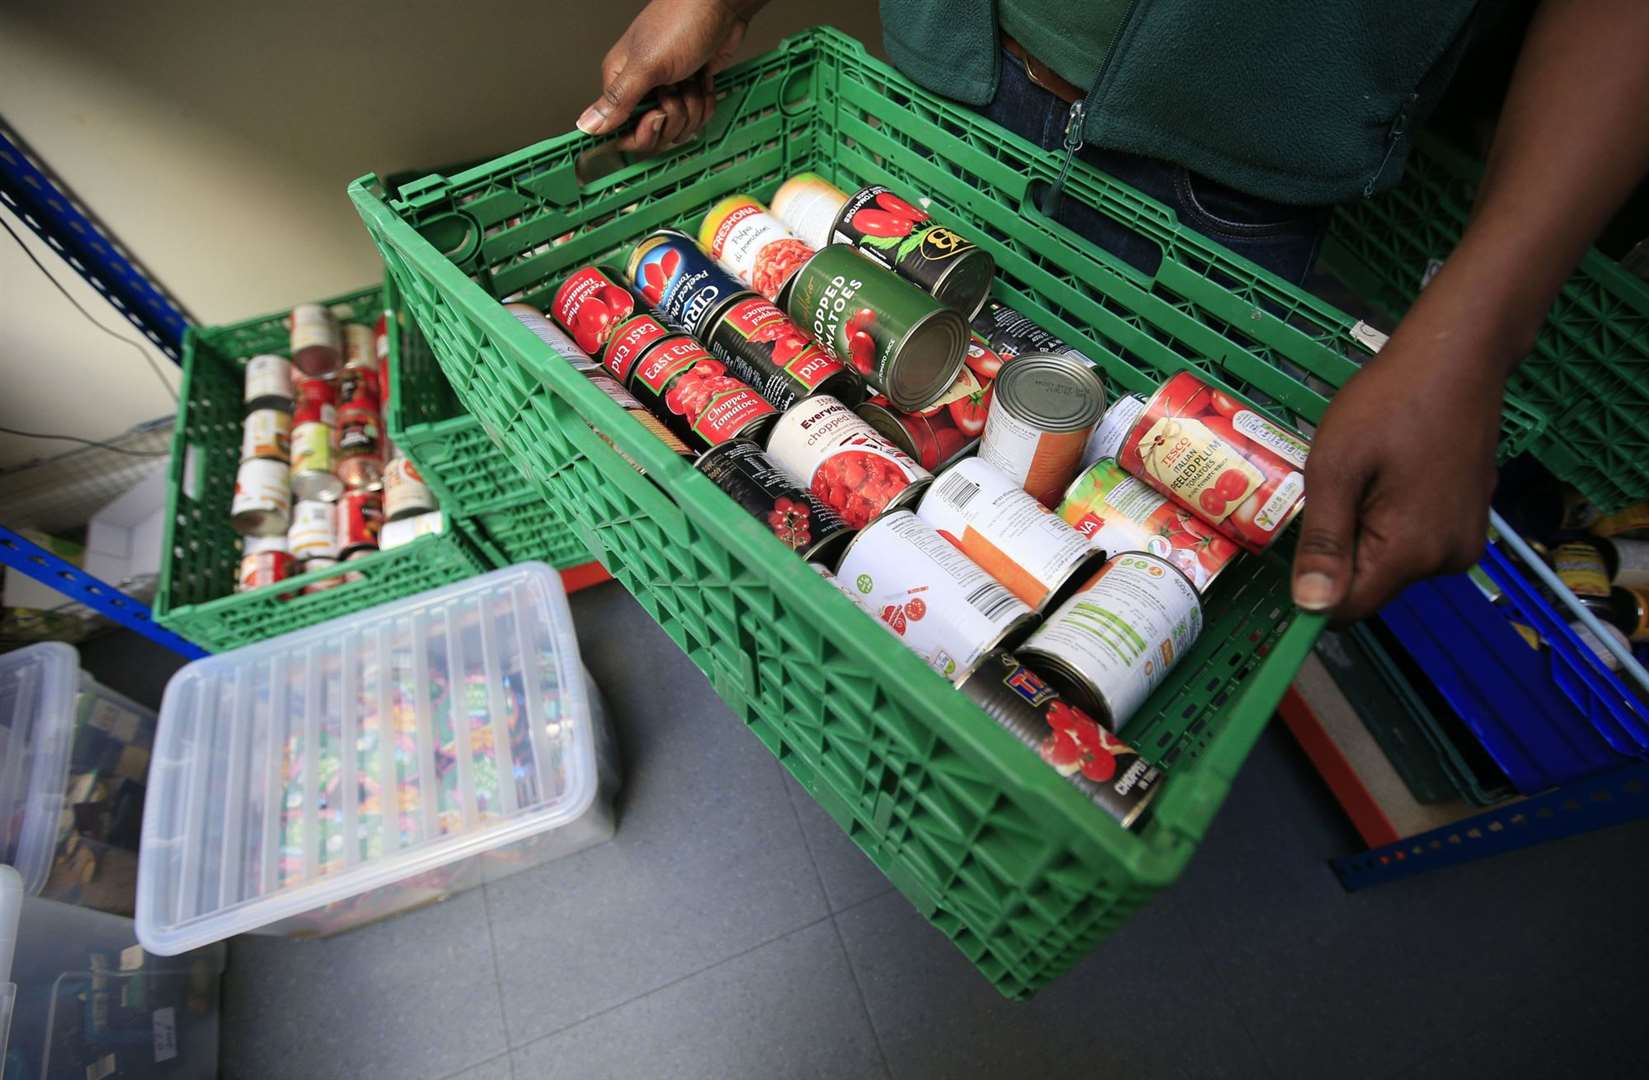 More emergency food parcels are being handed out than ever before due to the virus' effect people's jobs